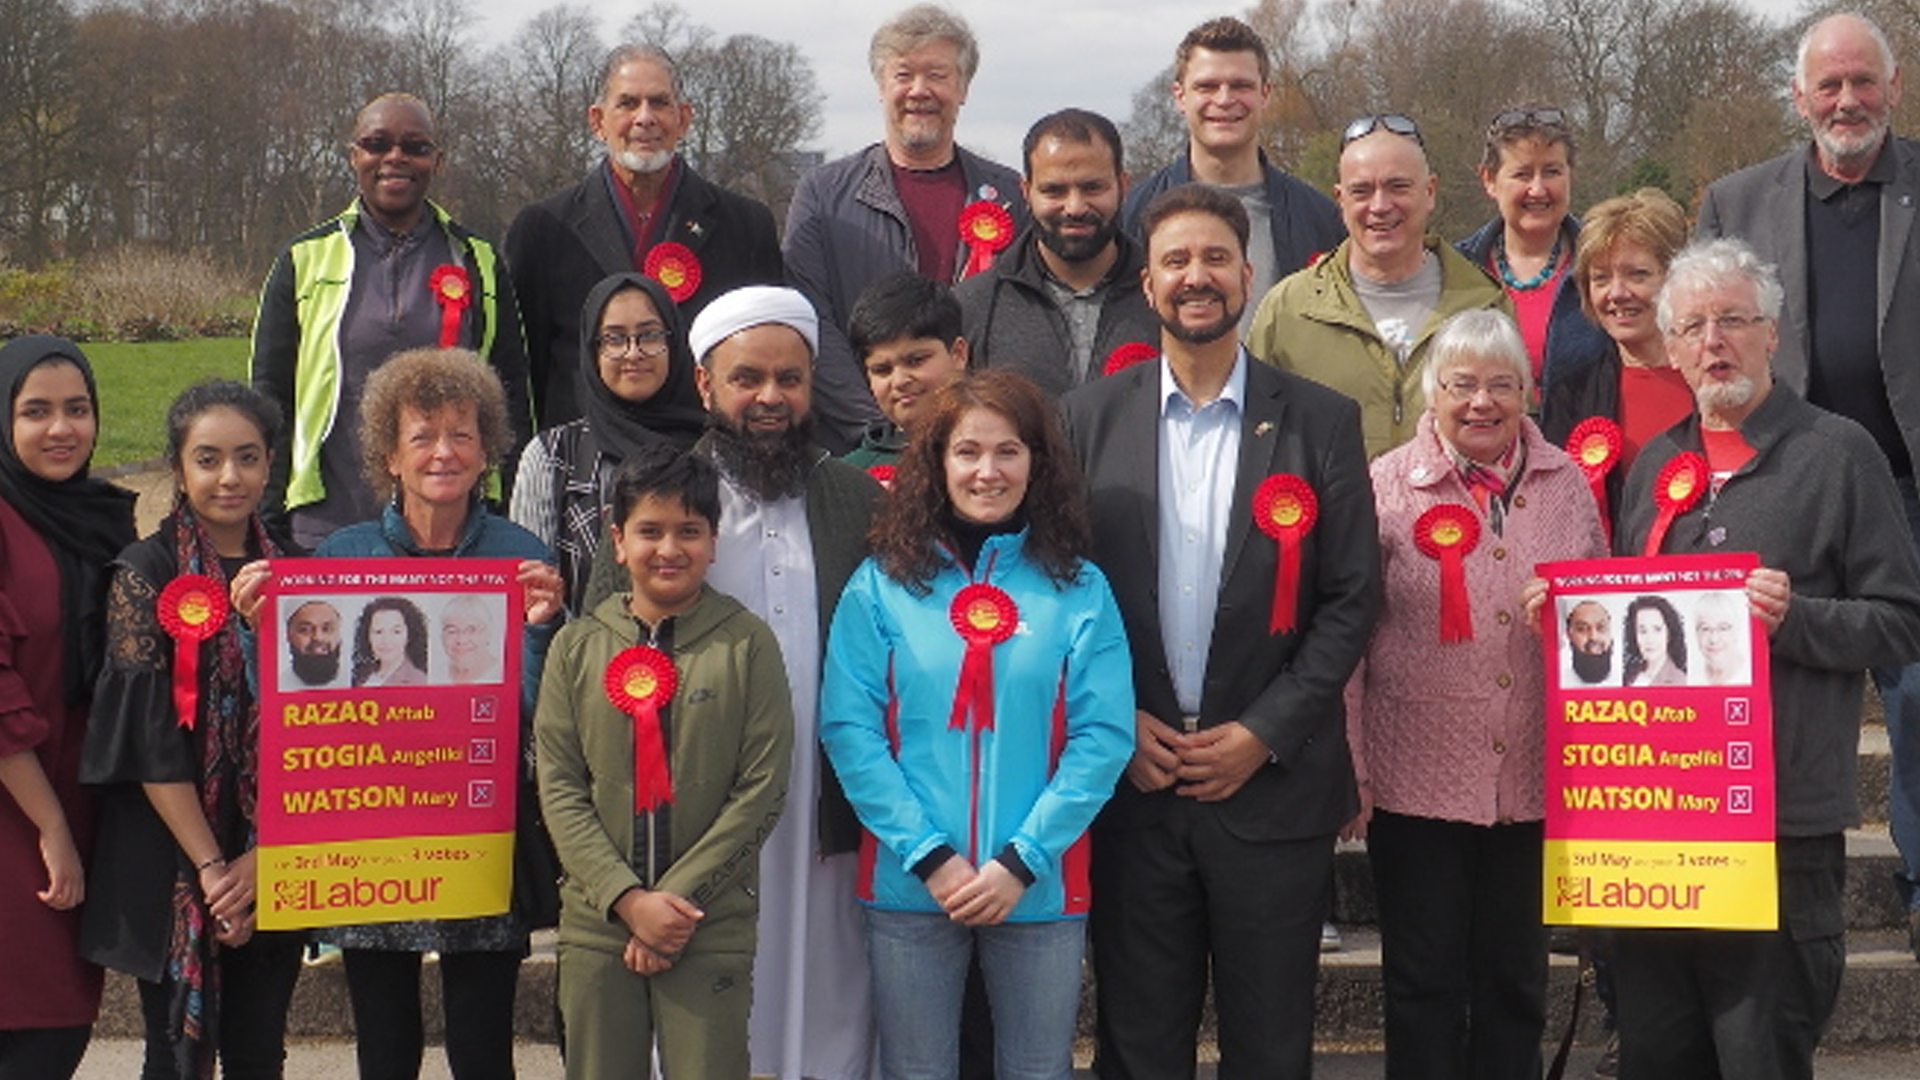 Whalley Range Labour - Labour MP Councillors Members and Supporters in Alexander Park